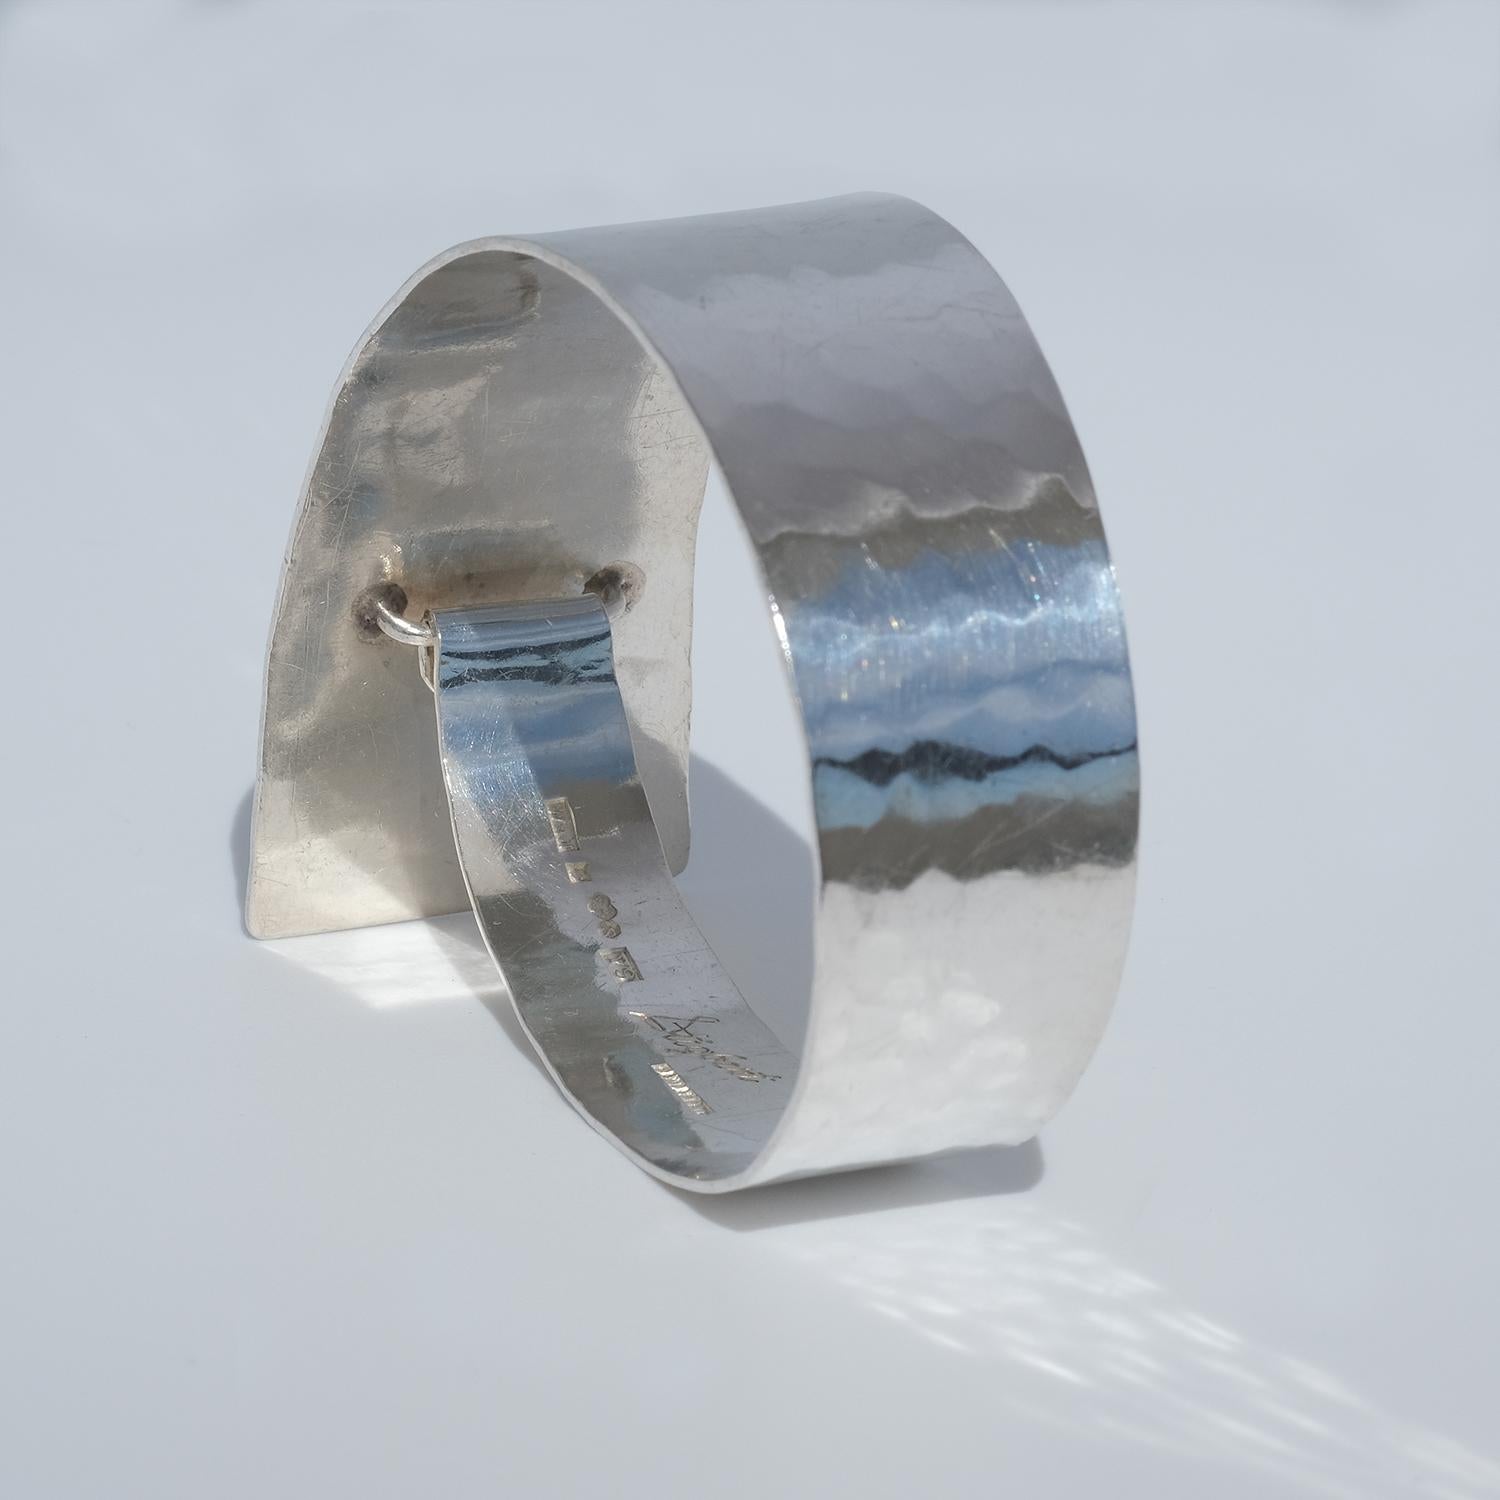 This fixed silver bangle has a beautiful hammered surface and it closes with a clip.

The endings of the bangle are of different sizes, making it resemble a beautiful modern geometric installation.